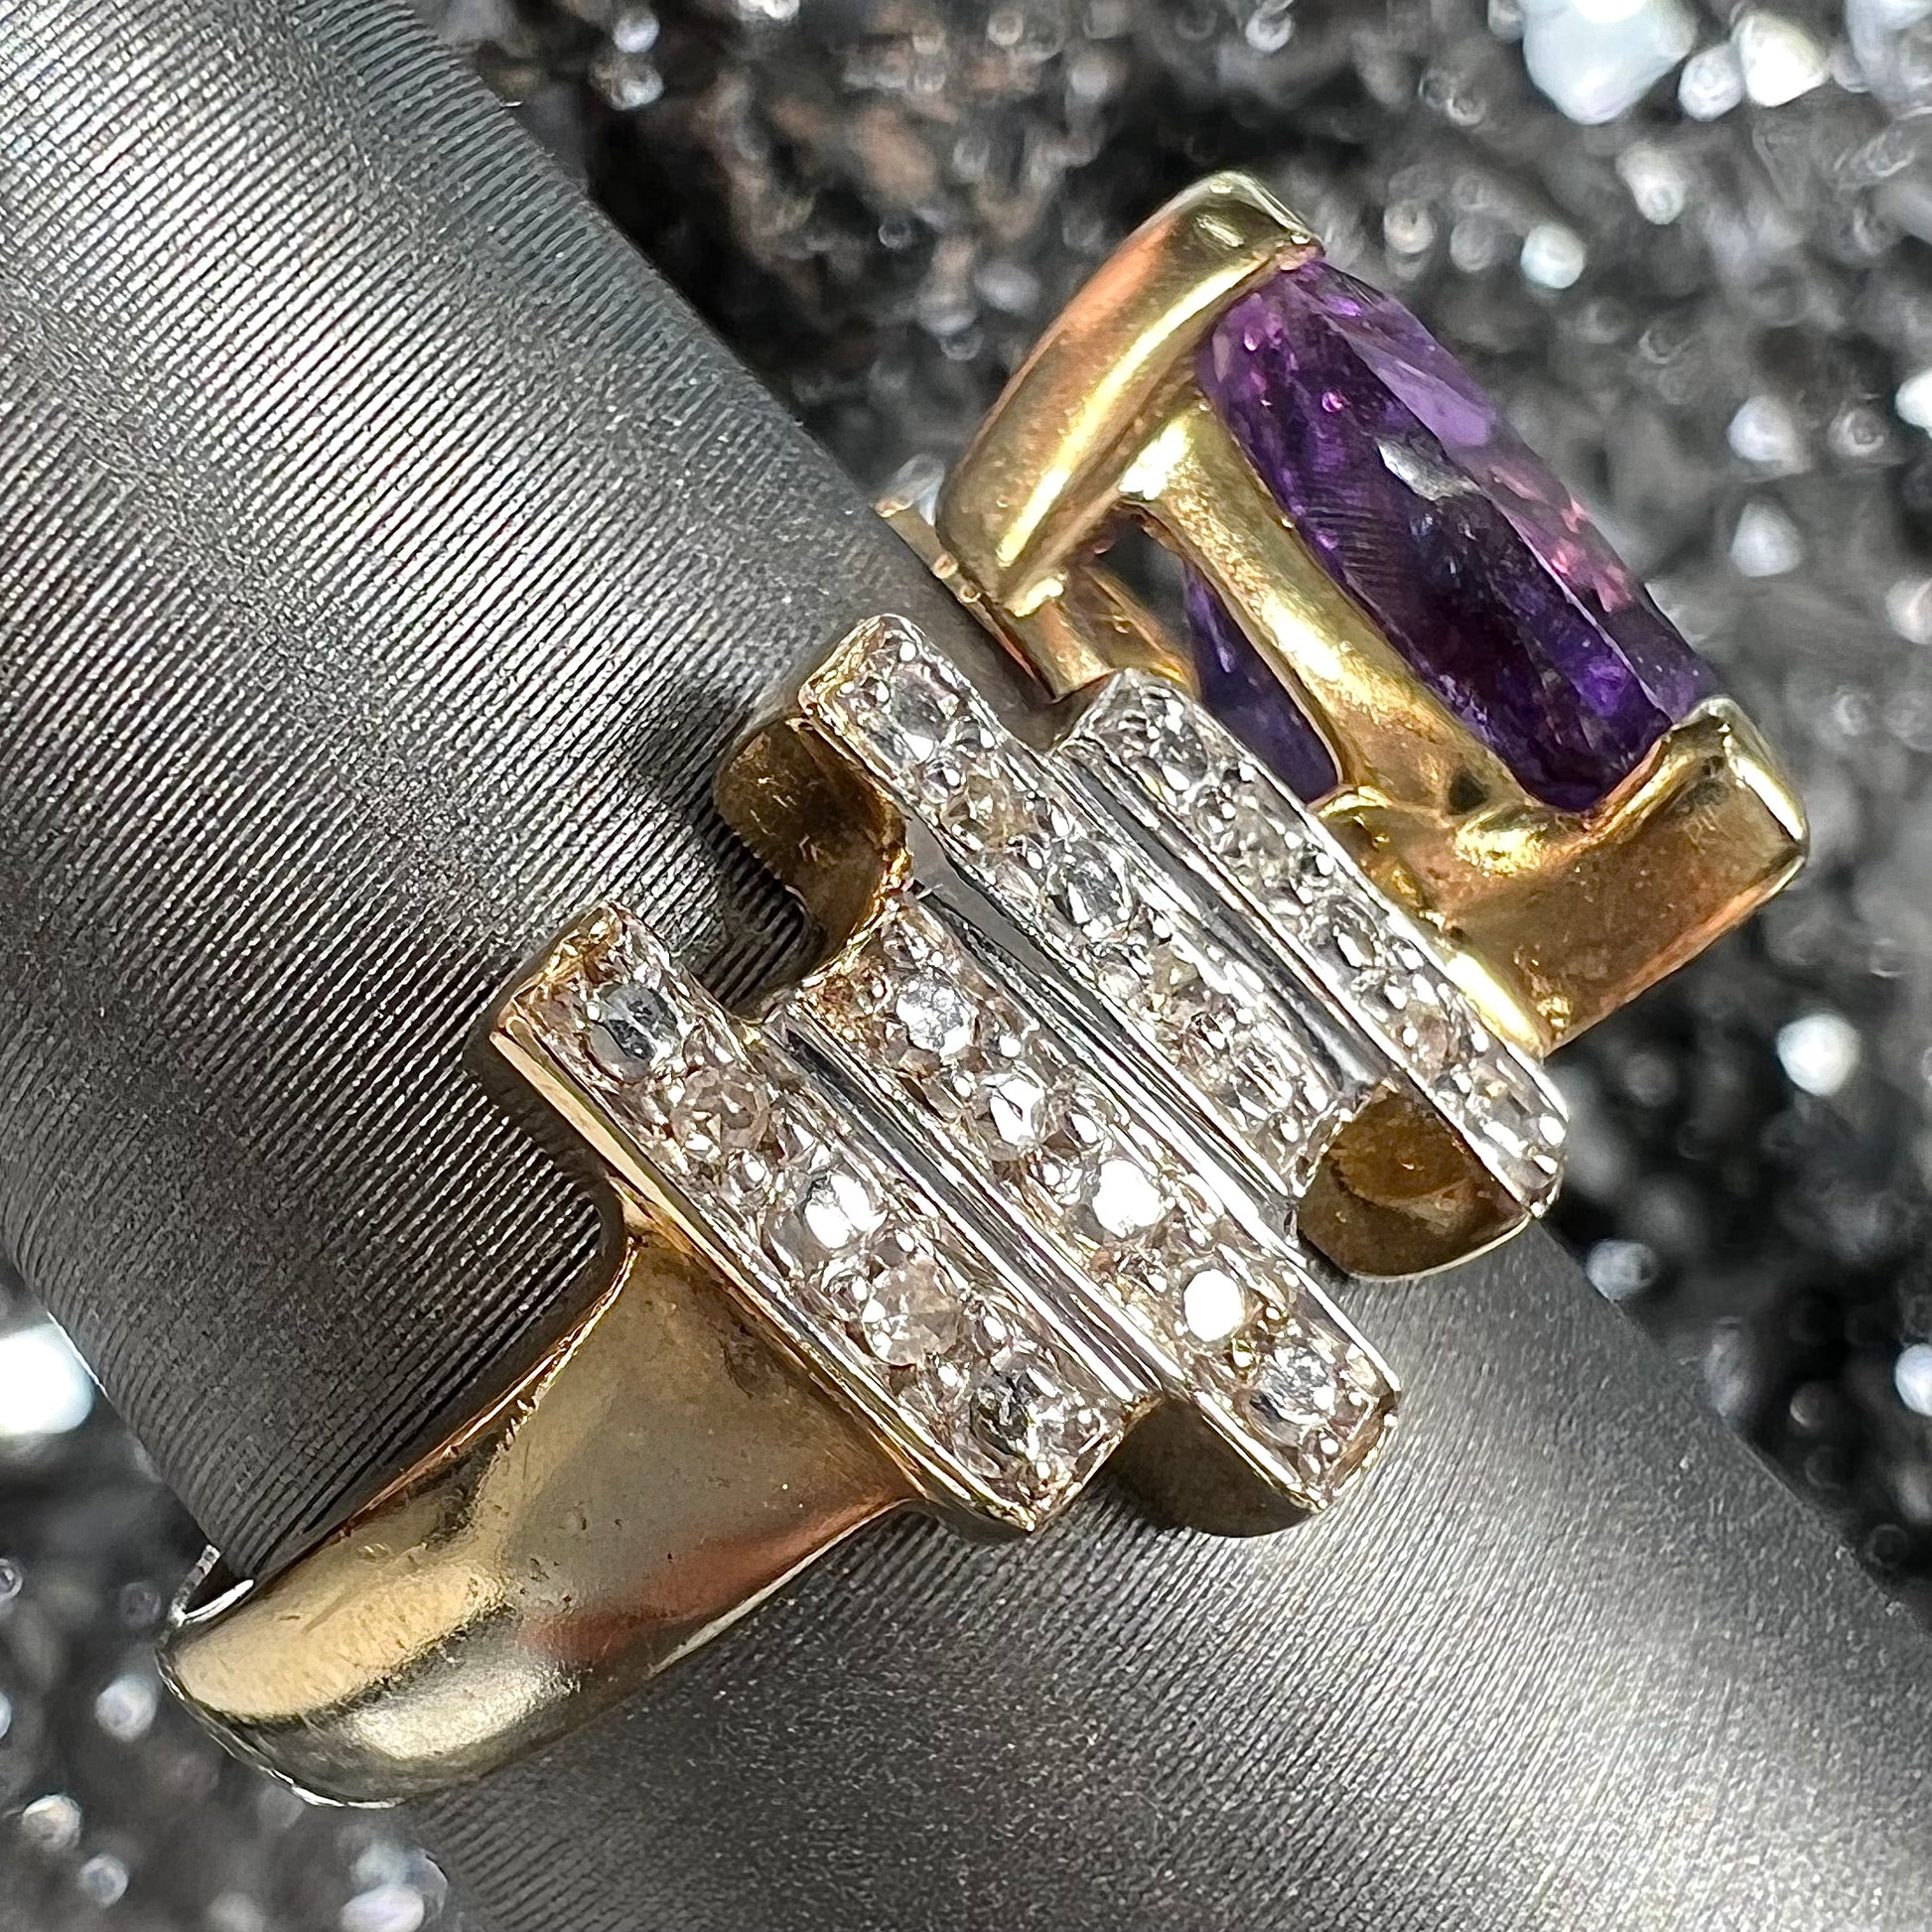 A yellow gold ring set with a trillion cut amethyst and round diamond accent stones.